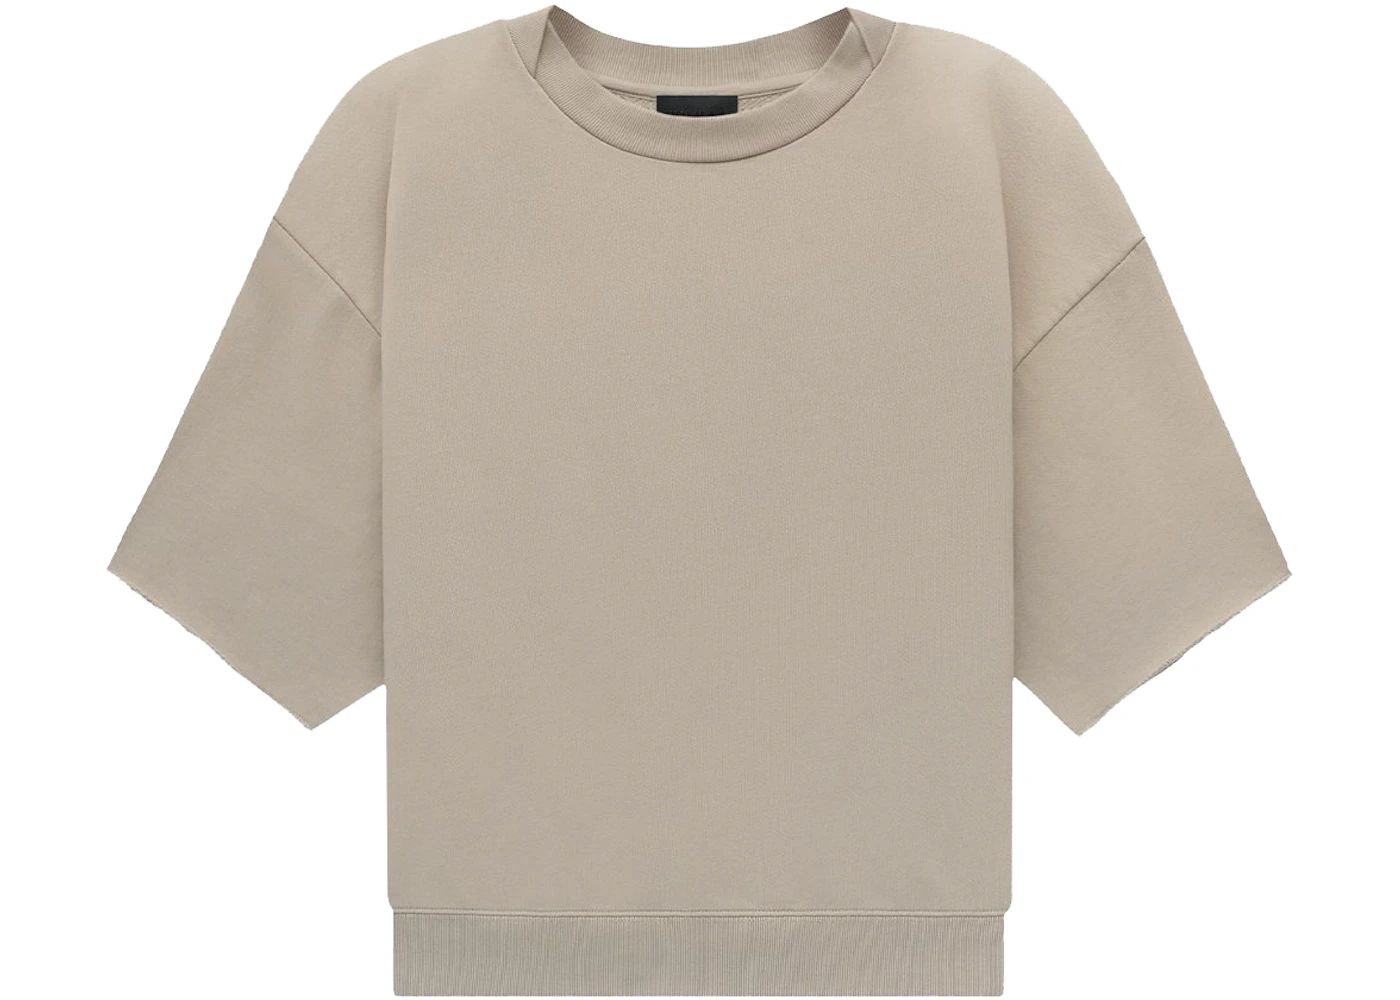 Fear of God Seventh Collection Overlapped 3/4 Sleeve SweatshirtParis Sky | StockX